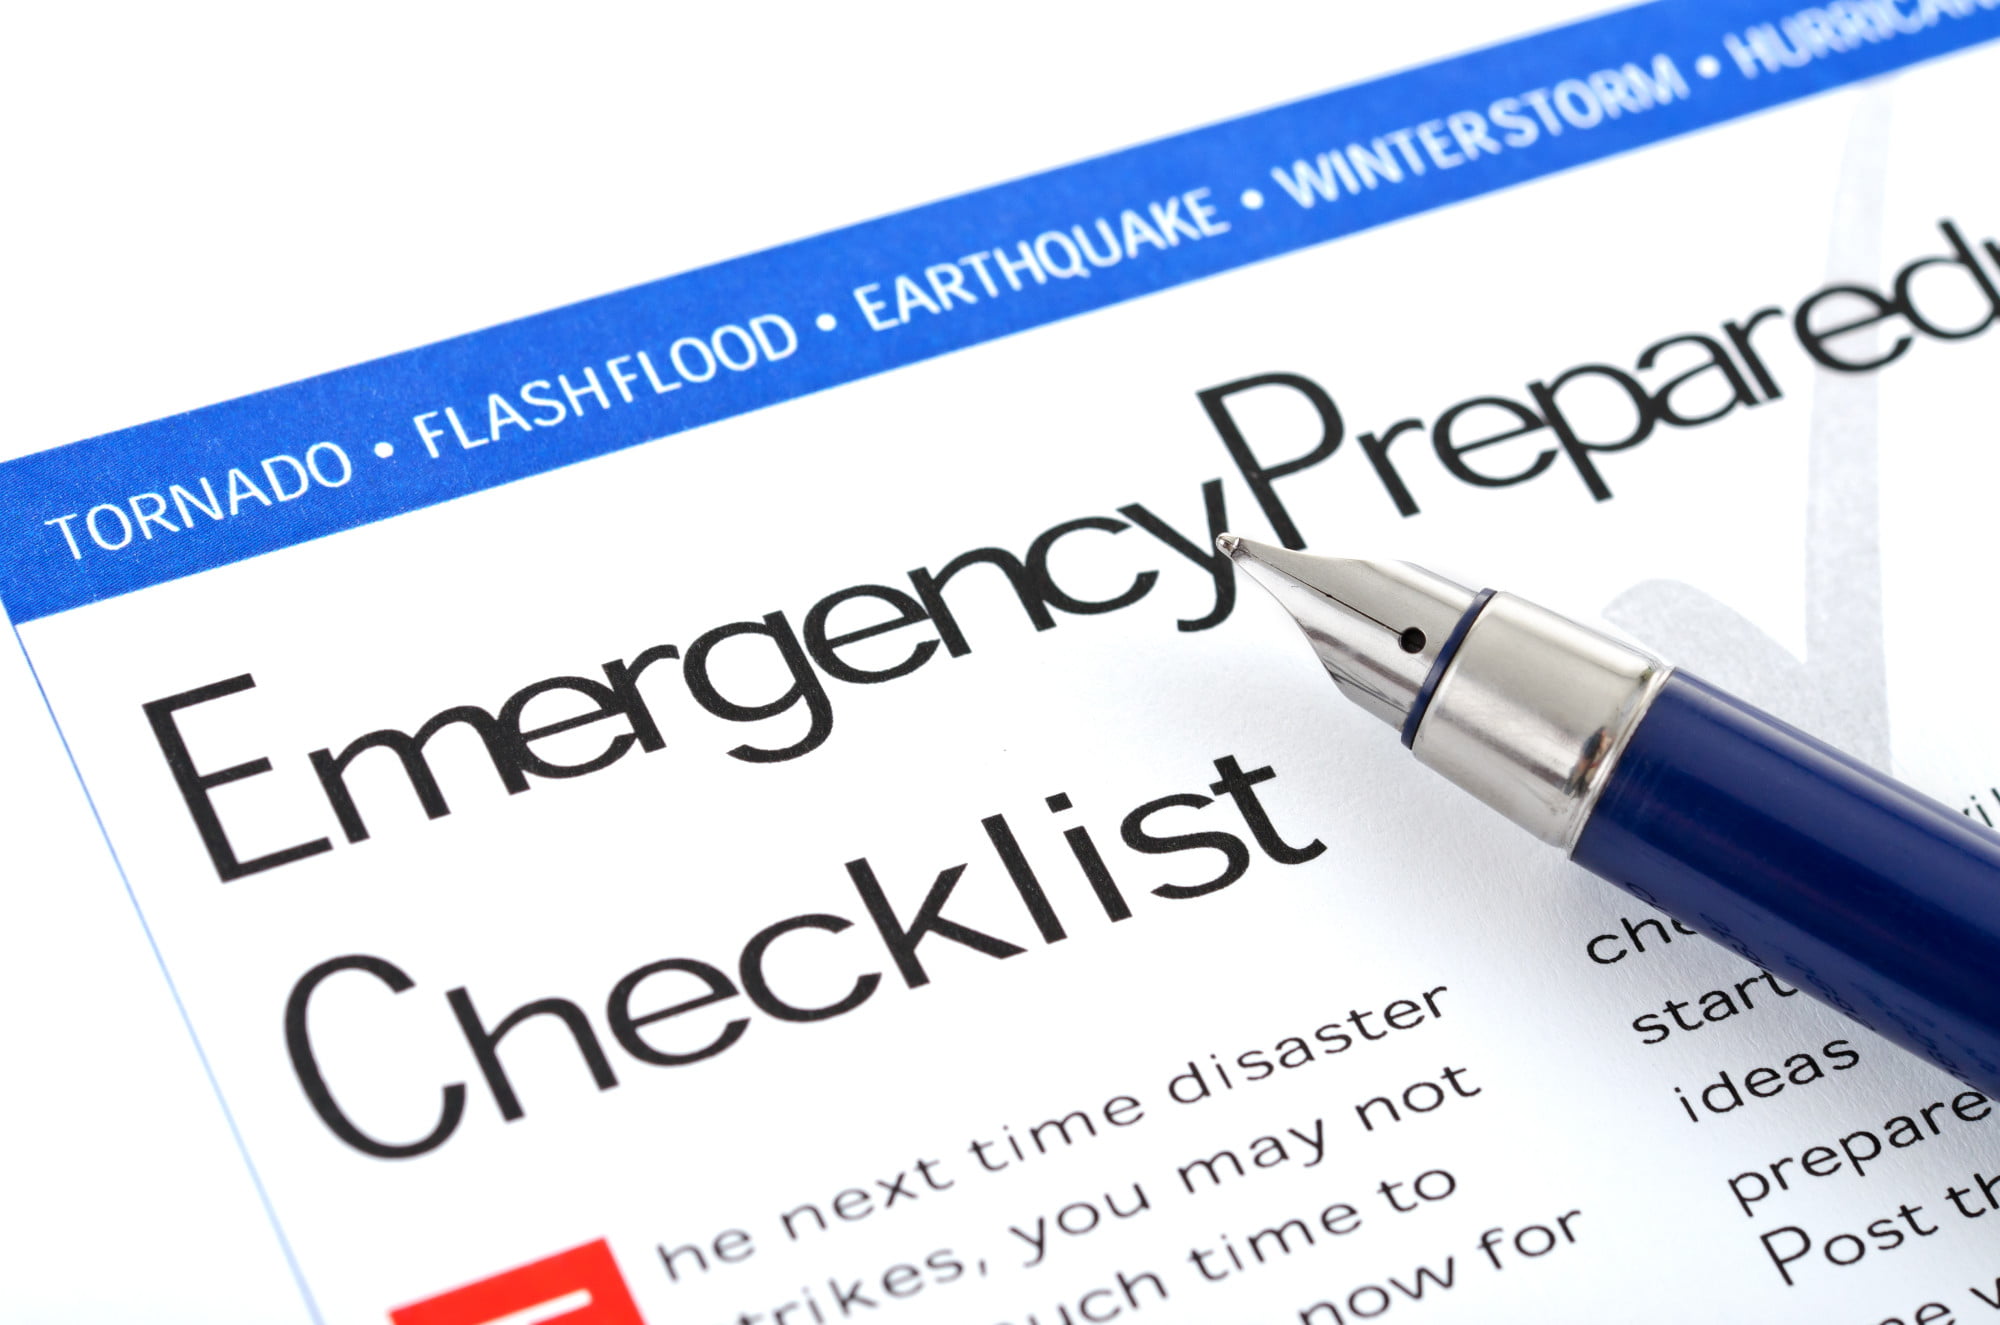 Are you wondering what you should do in an emergency situation? If so, take a look at this guide for more information.